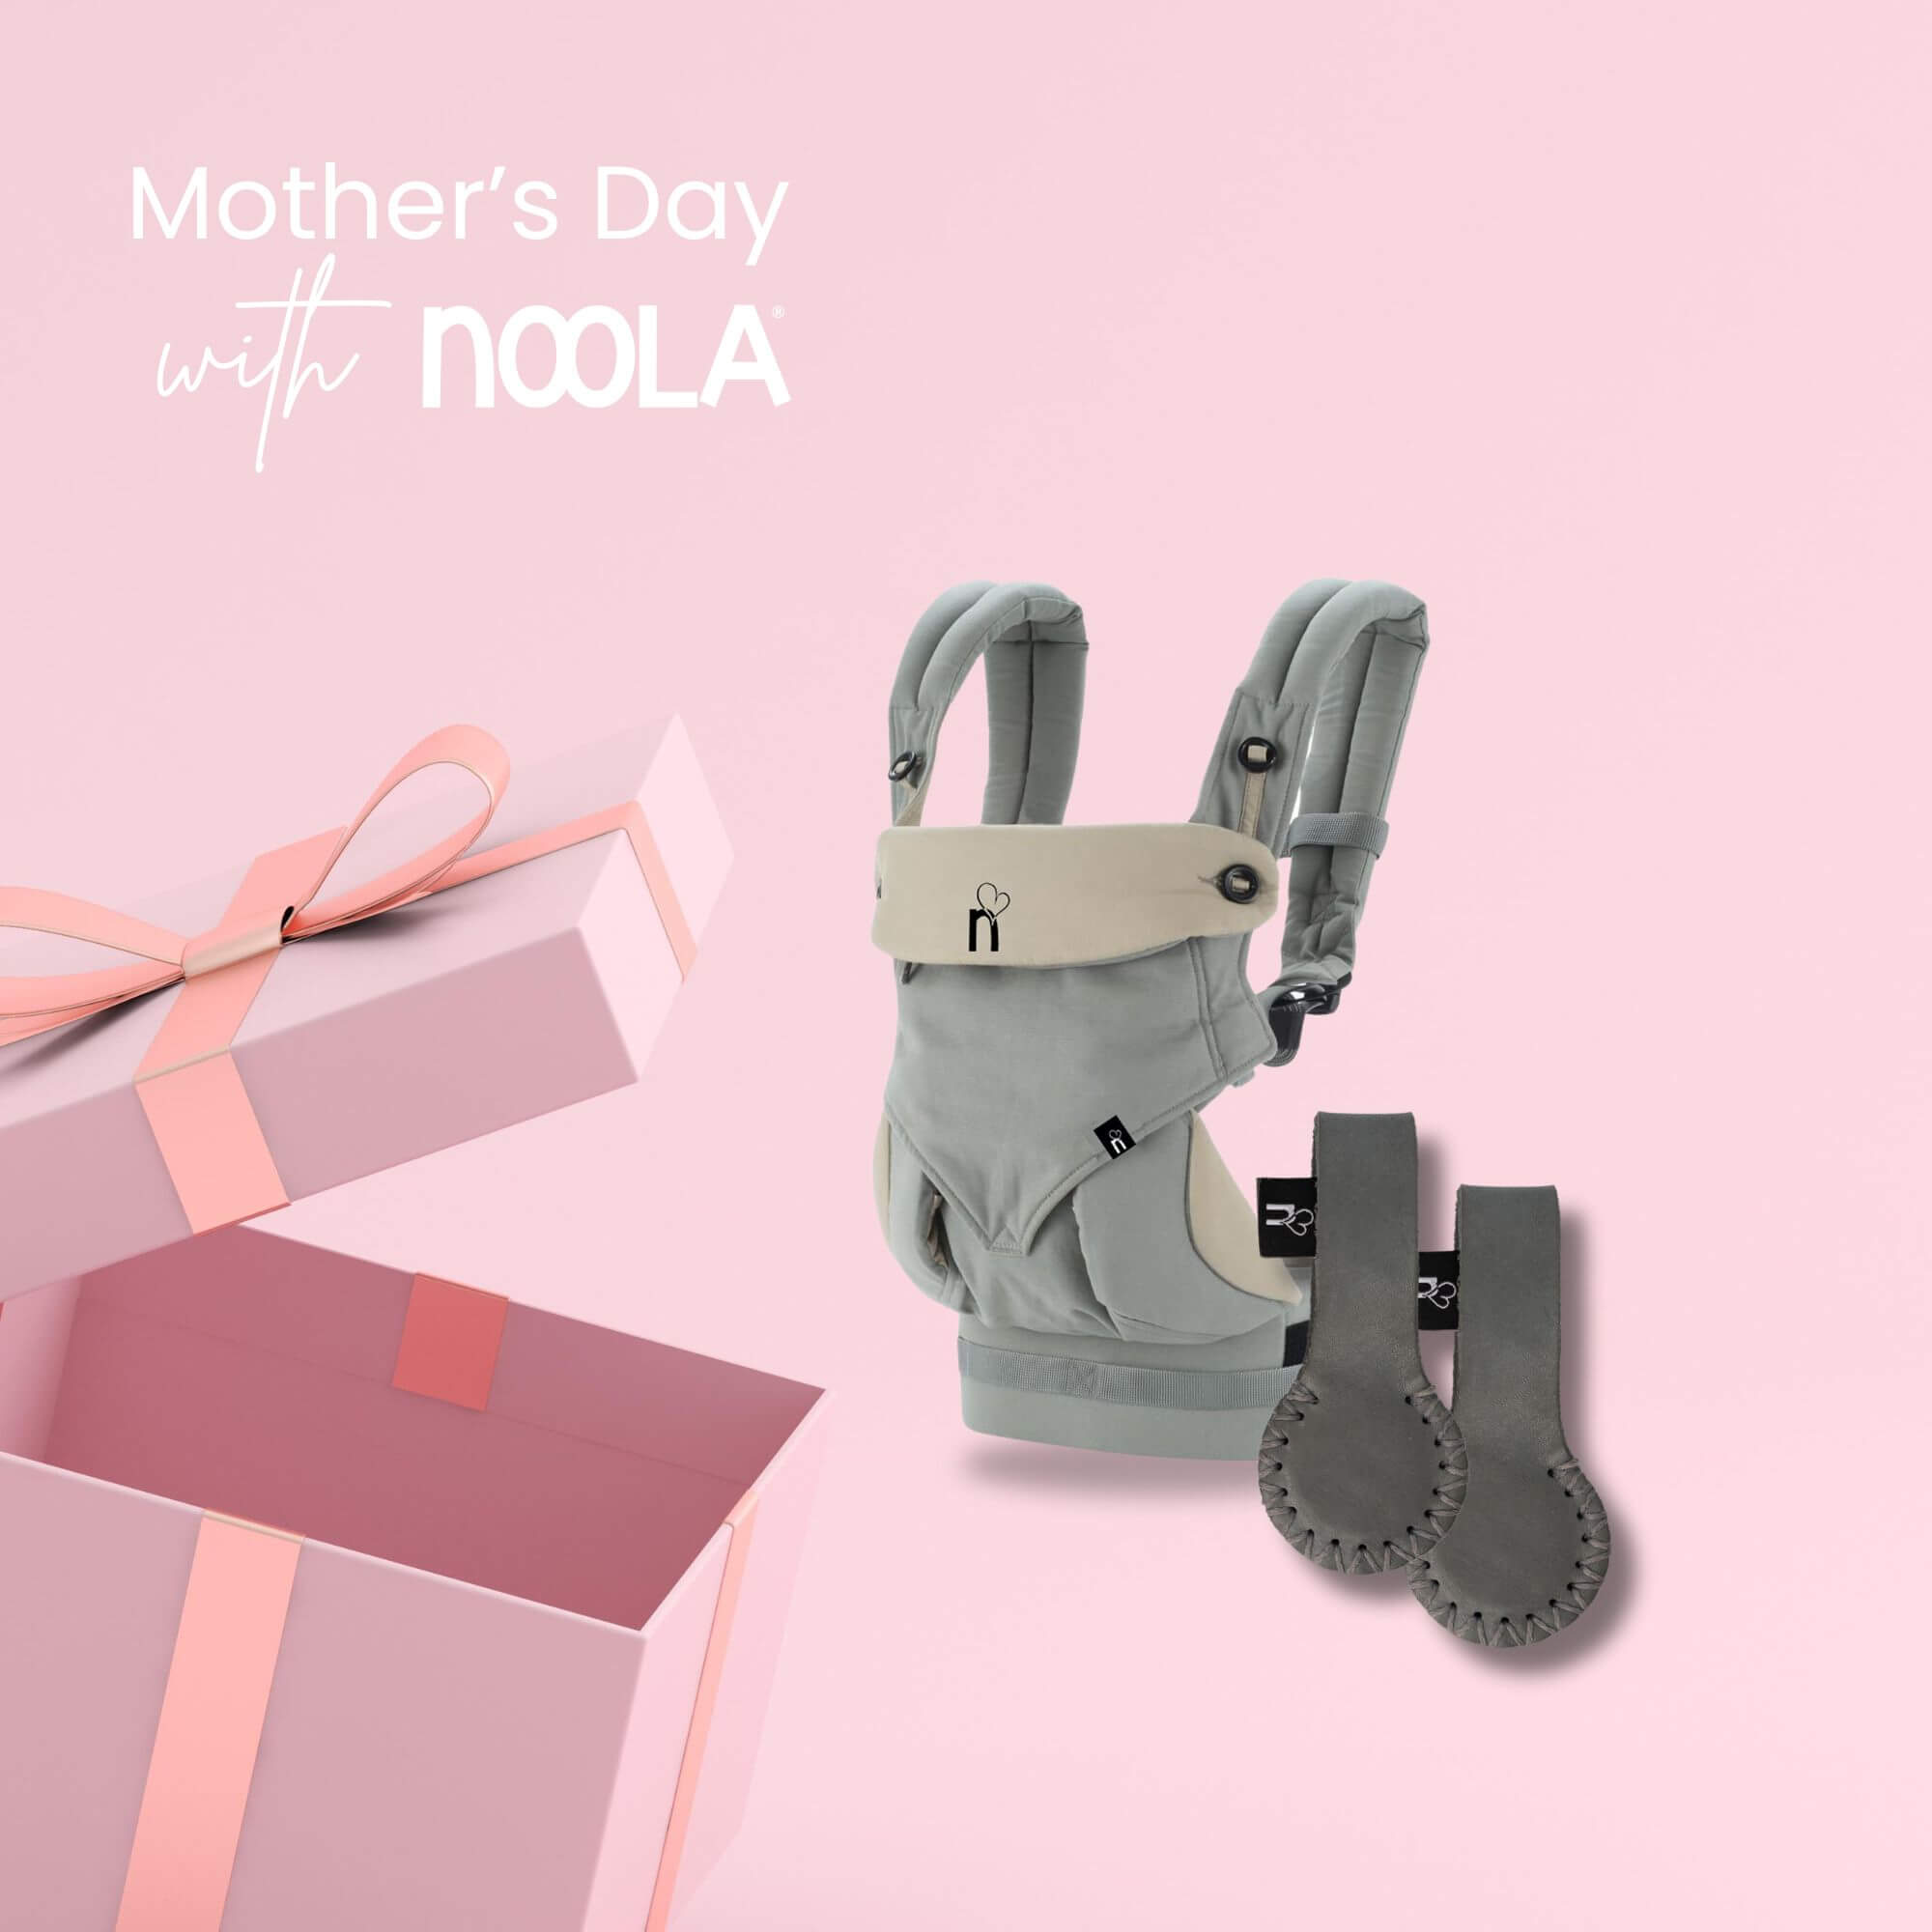 noola mothersday gift box bundle closer2you baby carrier grey with stella clips grey